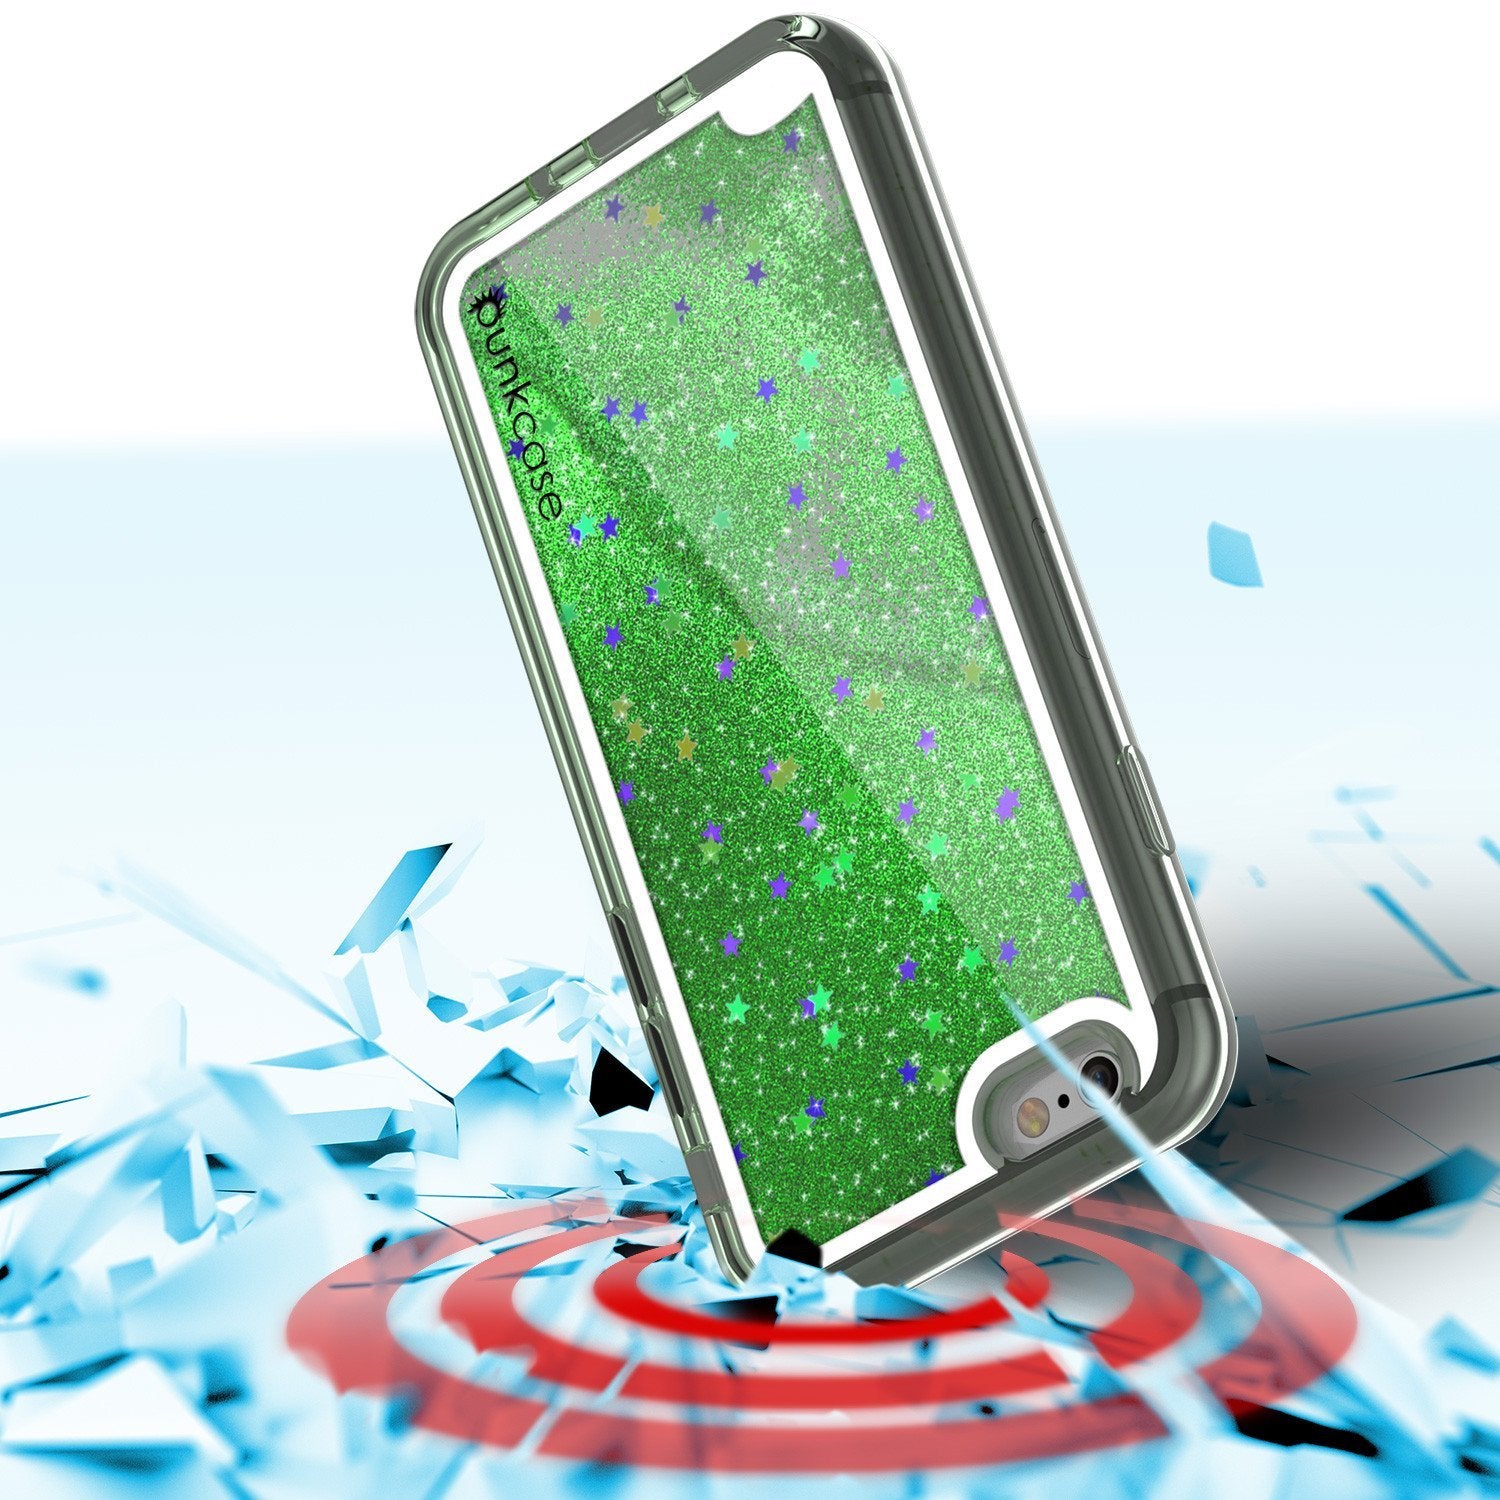 iPhone 8 Case, PunkCase LIQUID Green Series, Protective Dual Layer Floating Glitter Cover